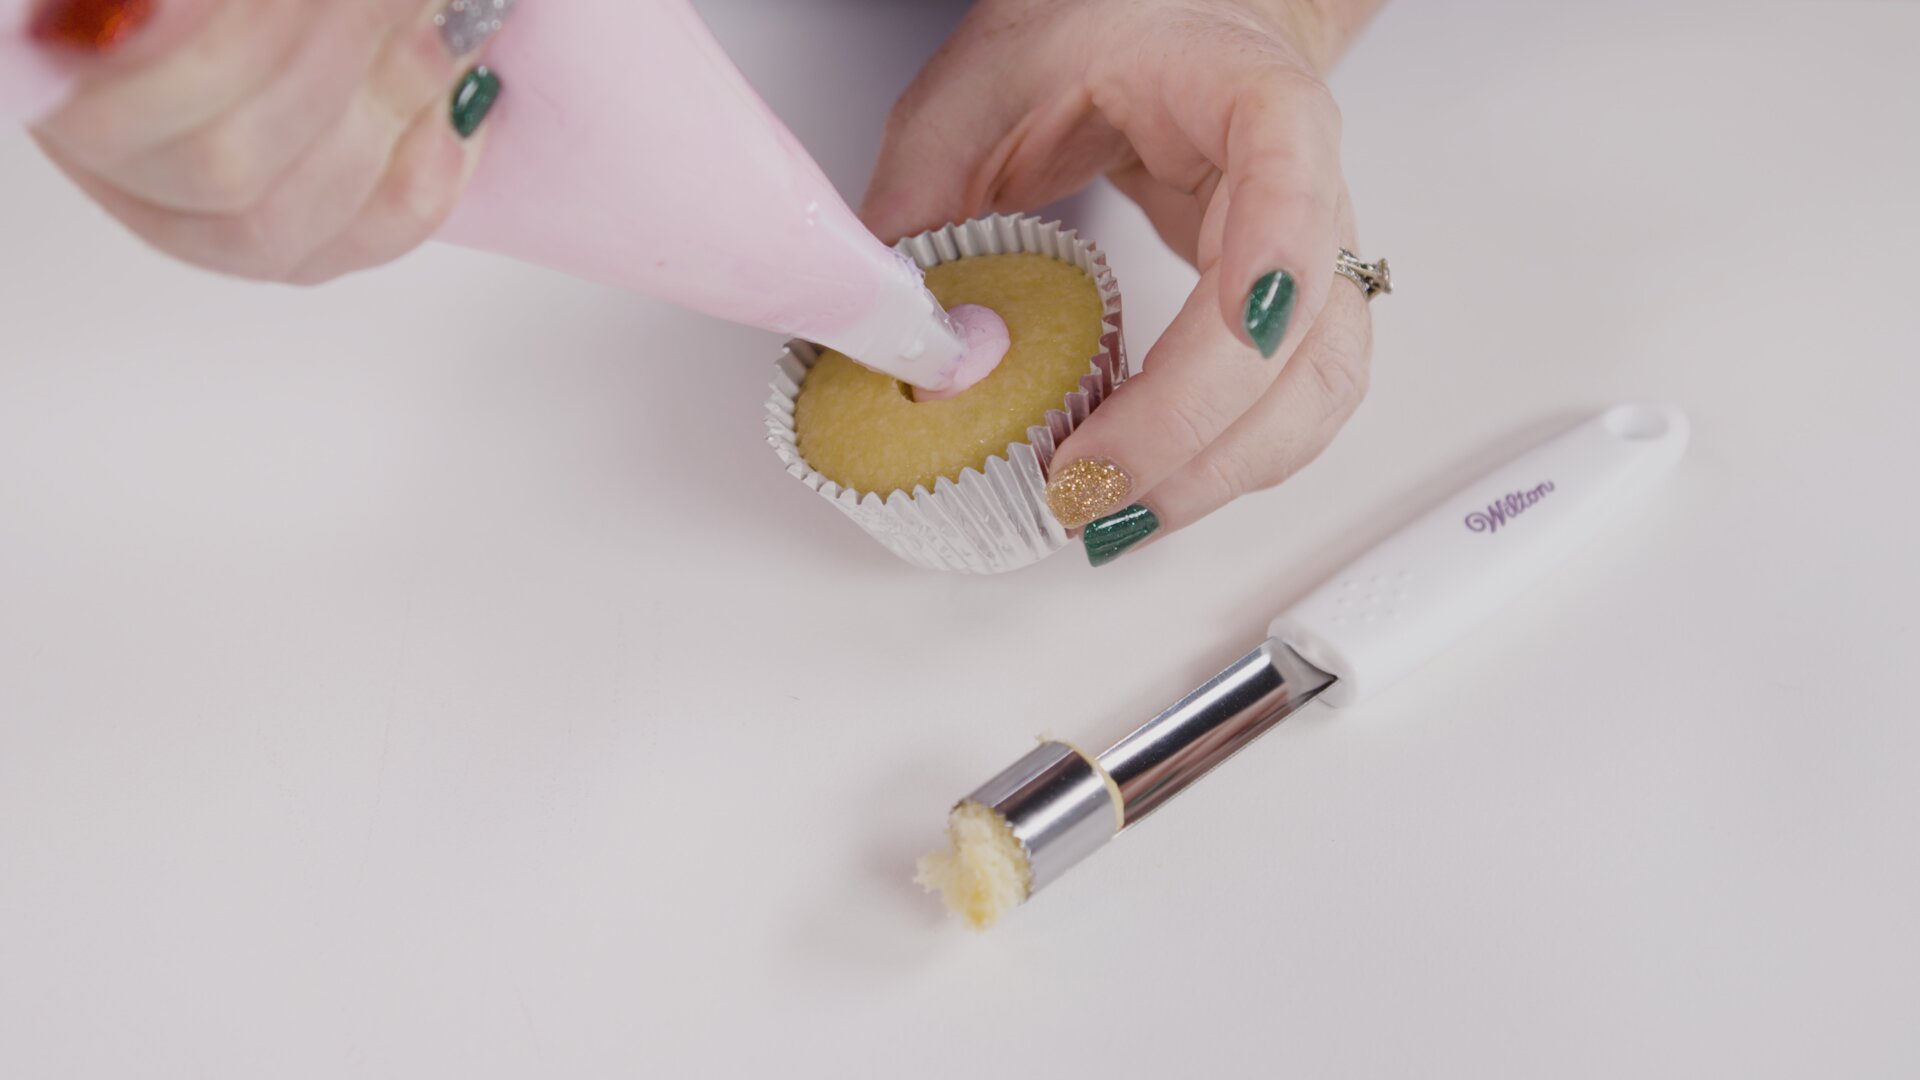 Cake Decorating Tools Buying Guide